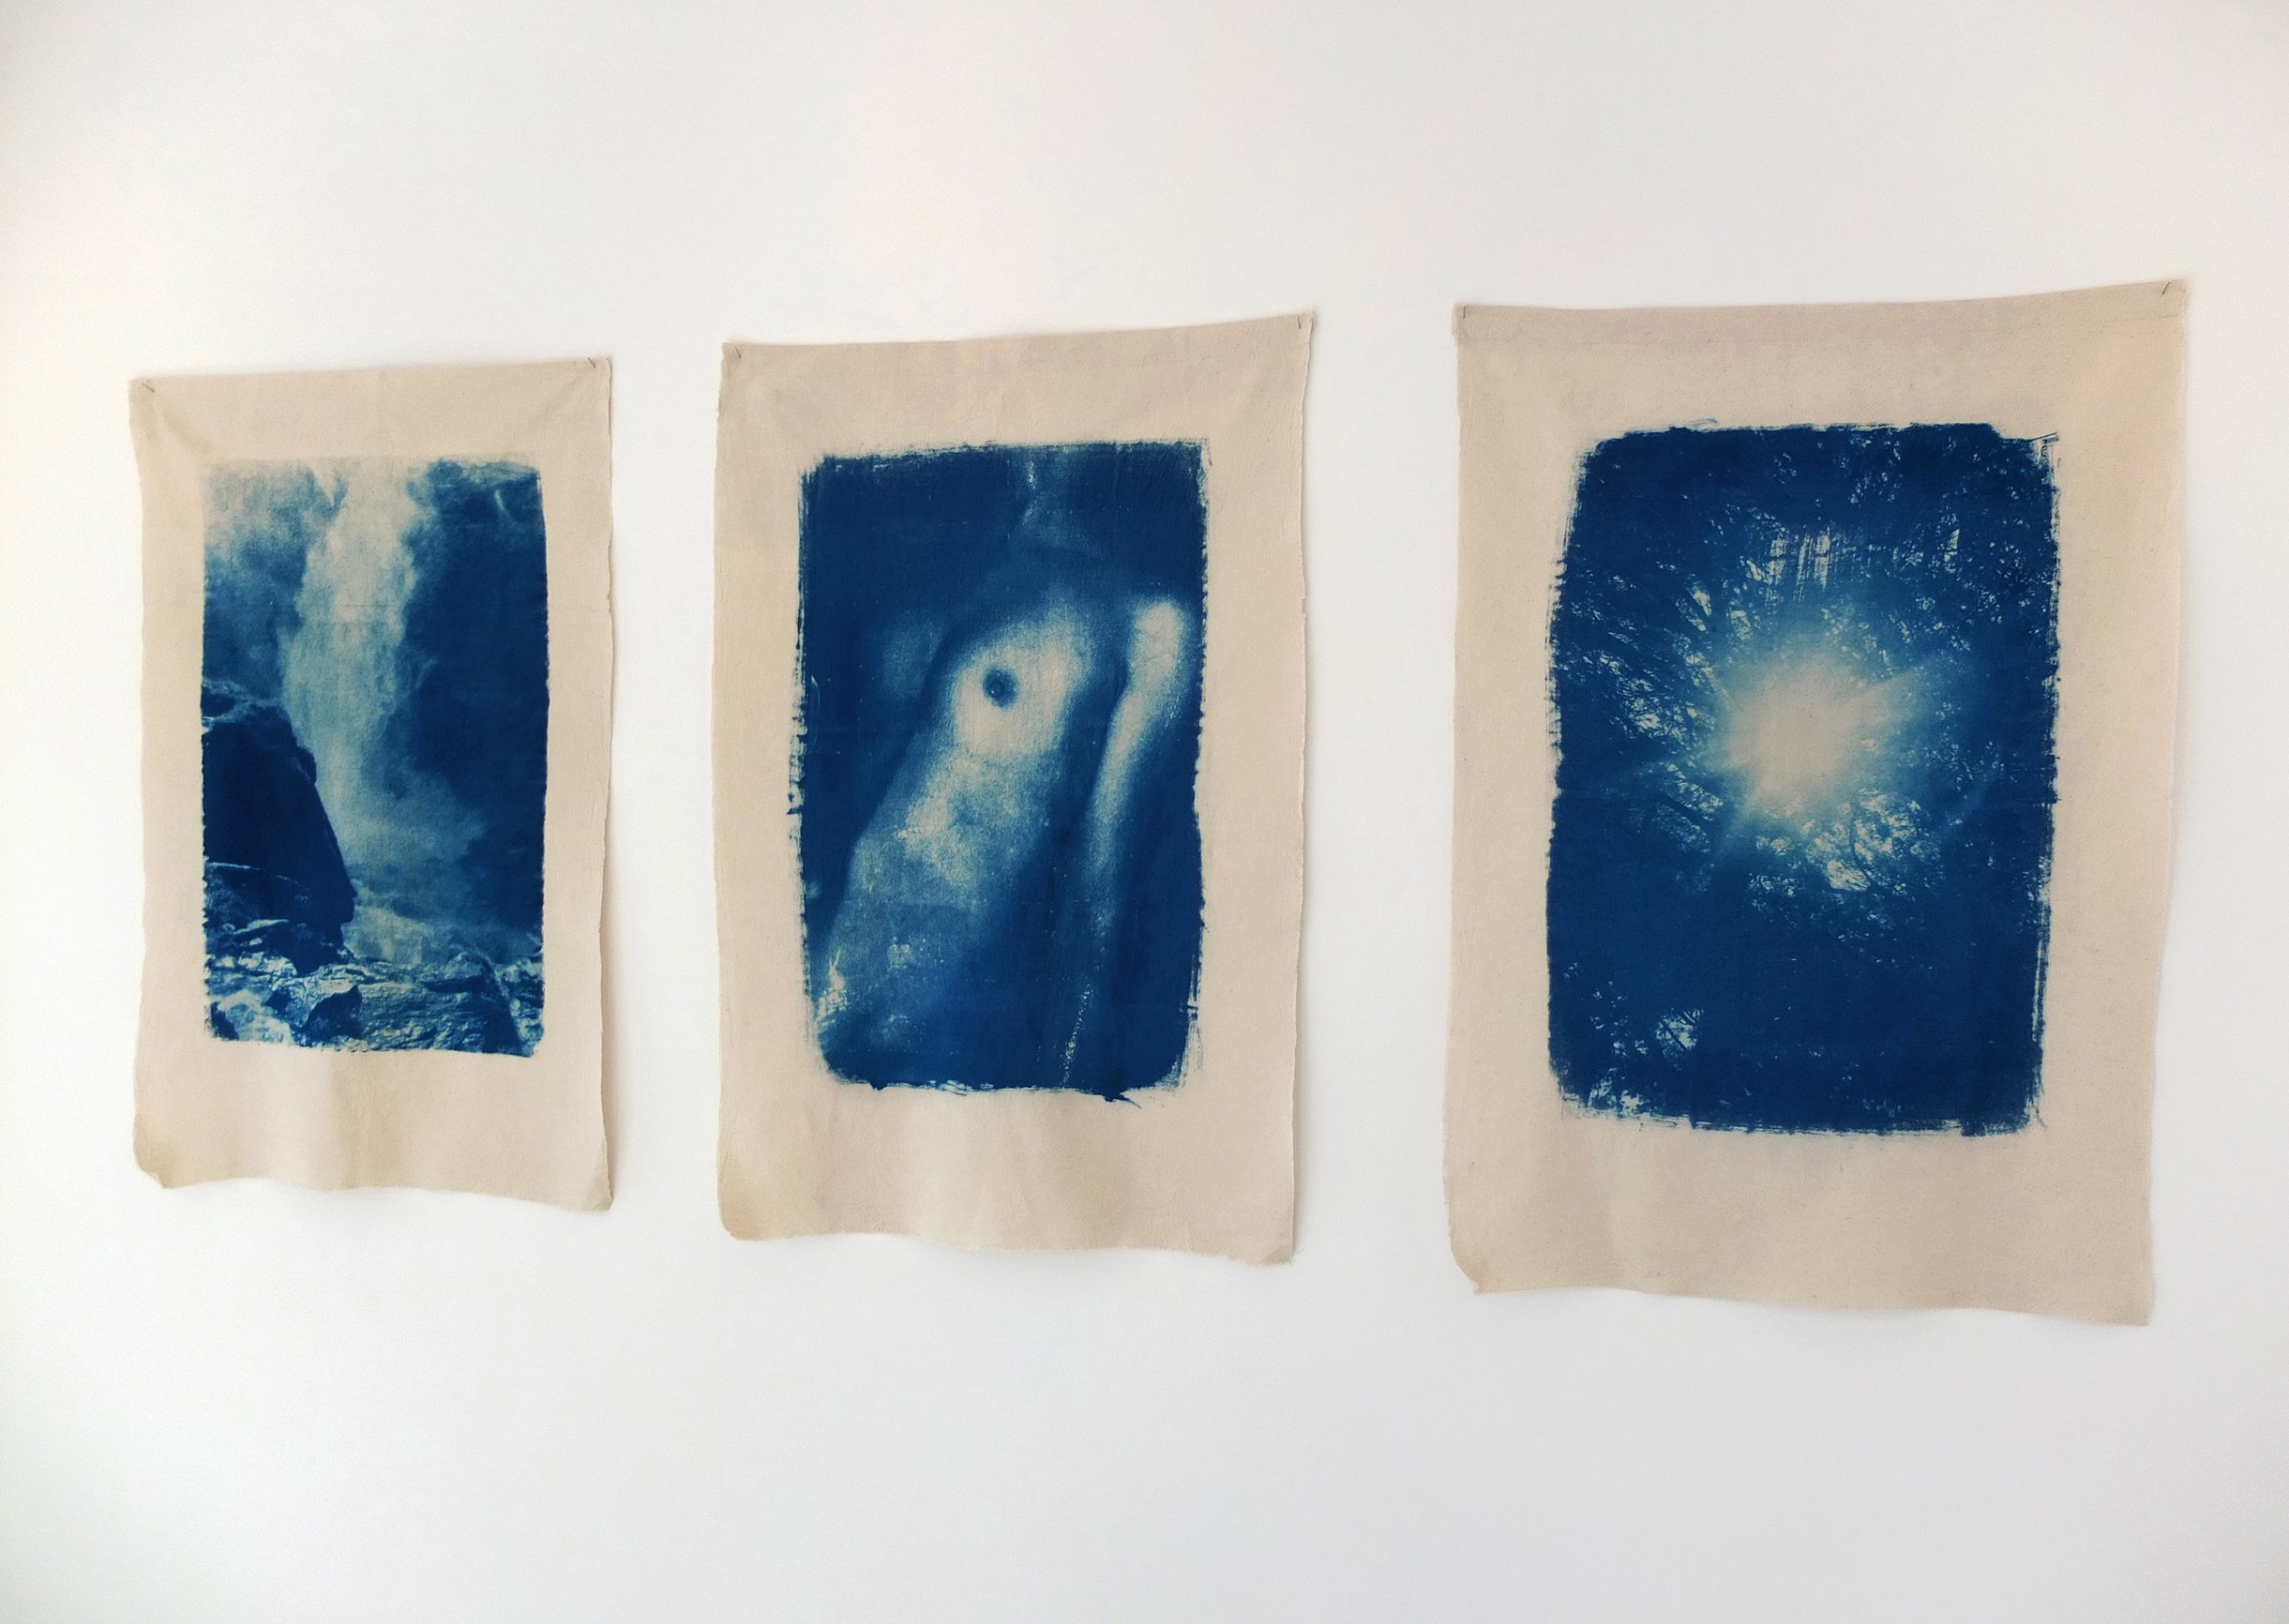  Cyanotypes on Organic Cotton Galerie Wilms 2021 